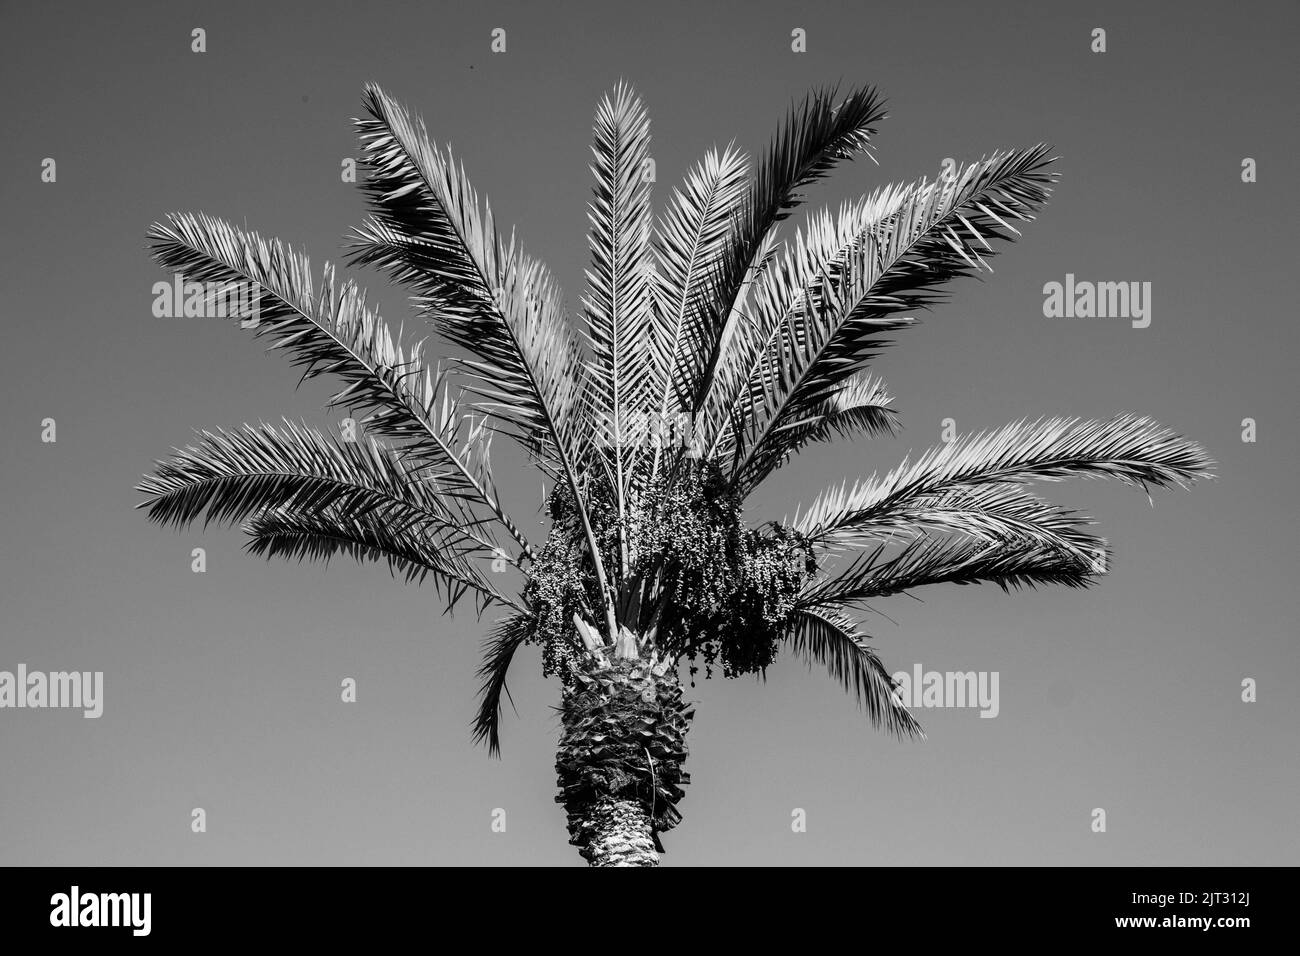 Captivating Black and White Palm Tree in Jaffa, Israel Stock Photo